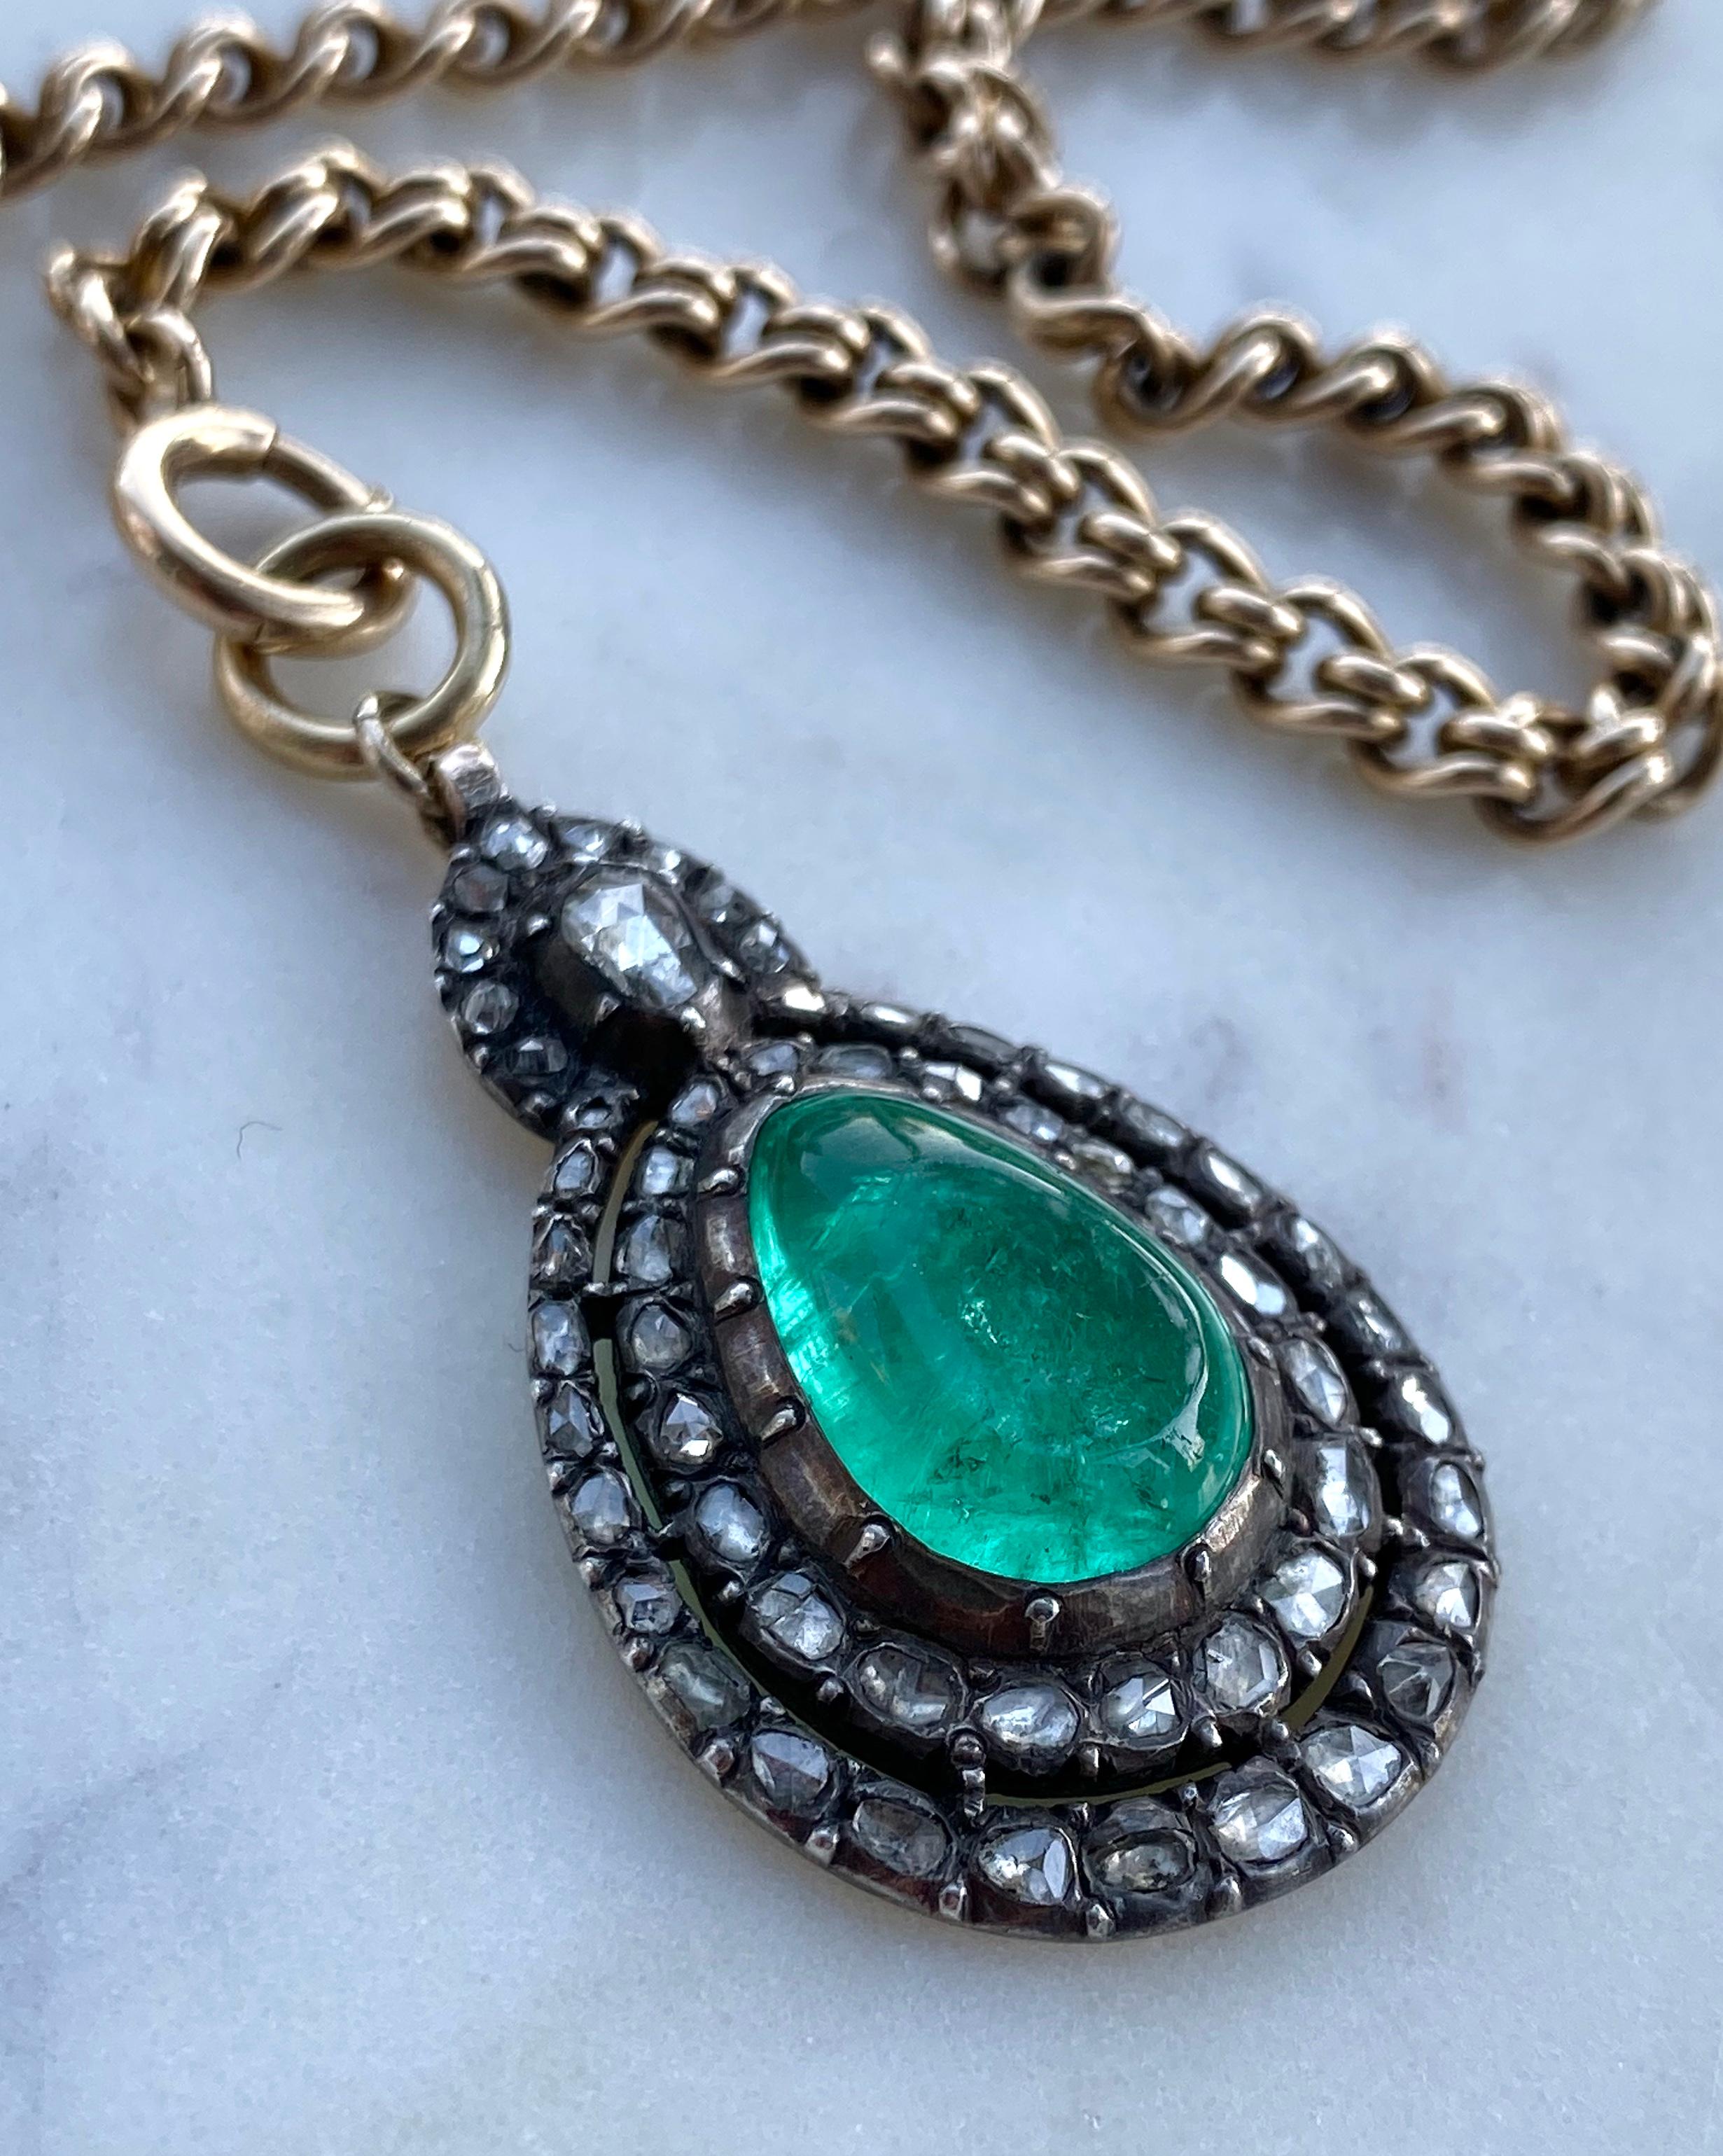 This gemmy Colombian emerald pendant was once likely part of a larger necklace dating to the early to mid 19th C. Weighing approximately 12 carats, this vibrant emerald glows from within a double frame of sparkling rose cut diamonds, hand-fabricated